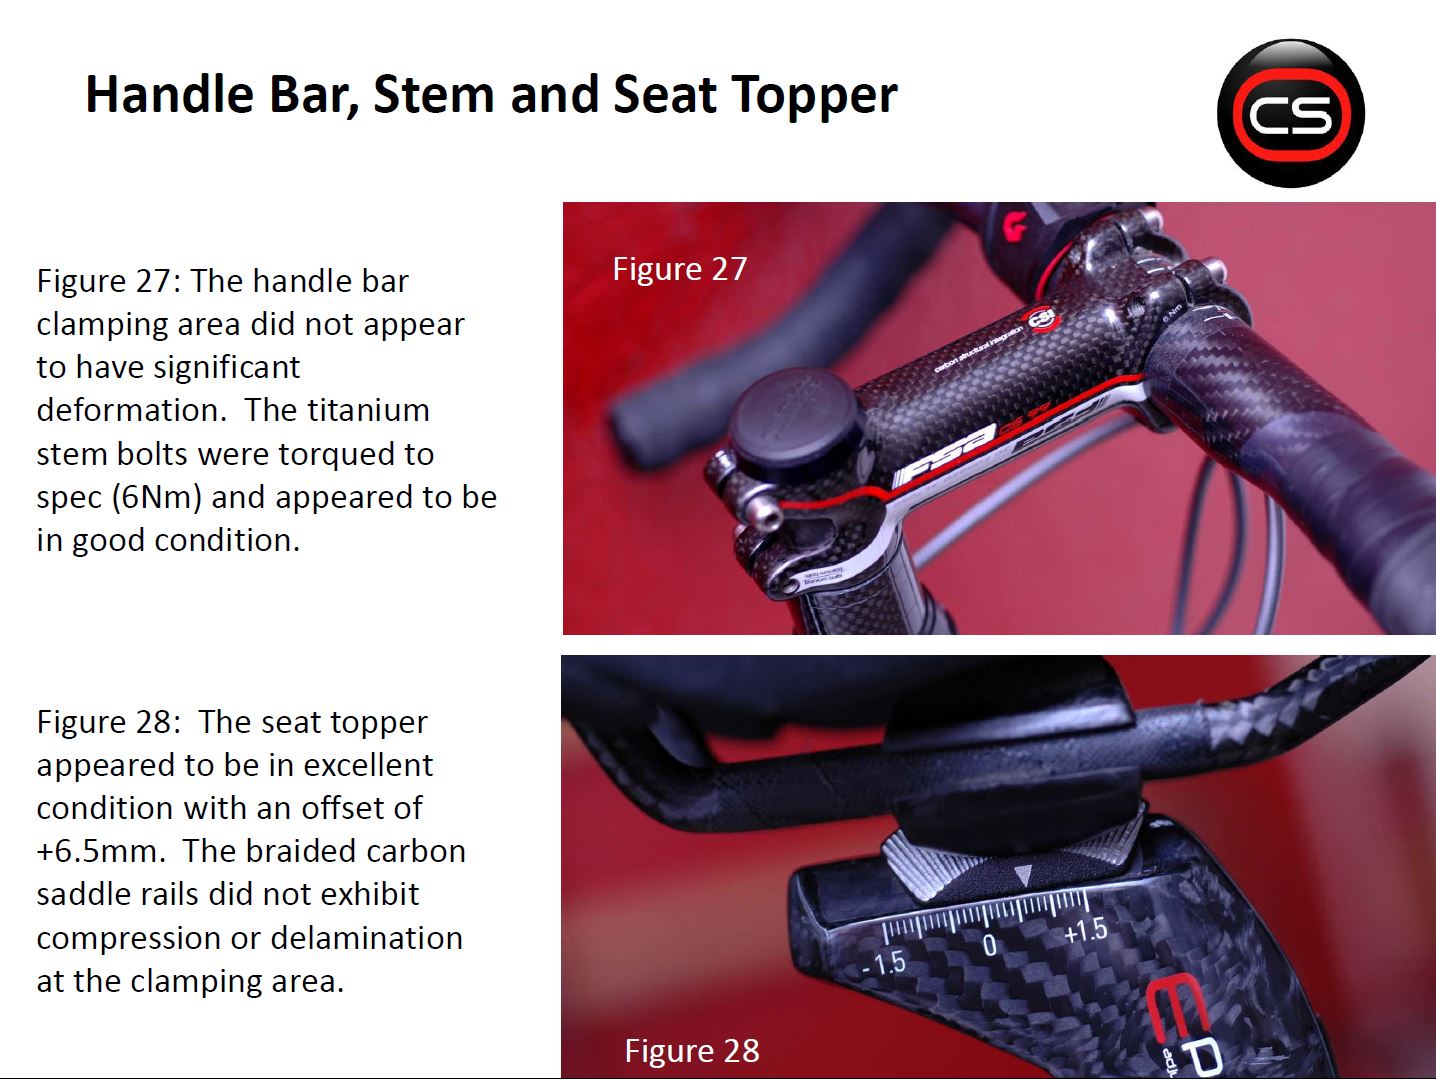 Handle Bar, Stem and Seat Topper images